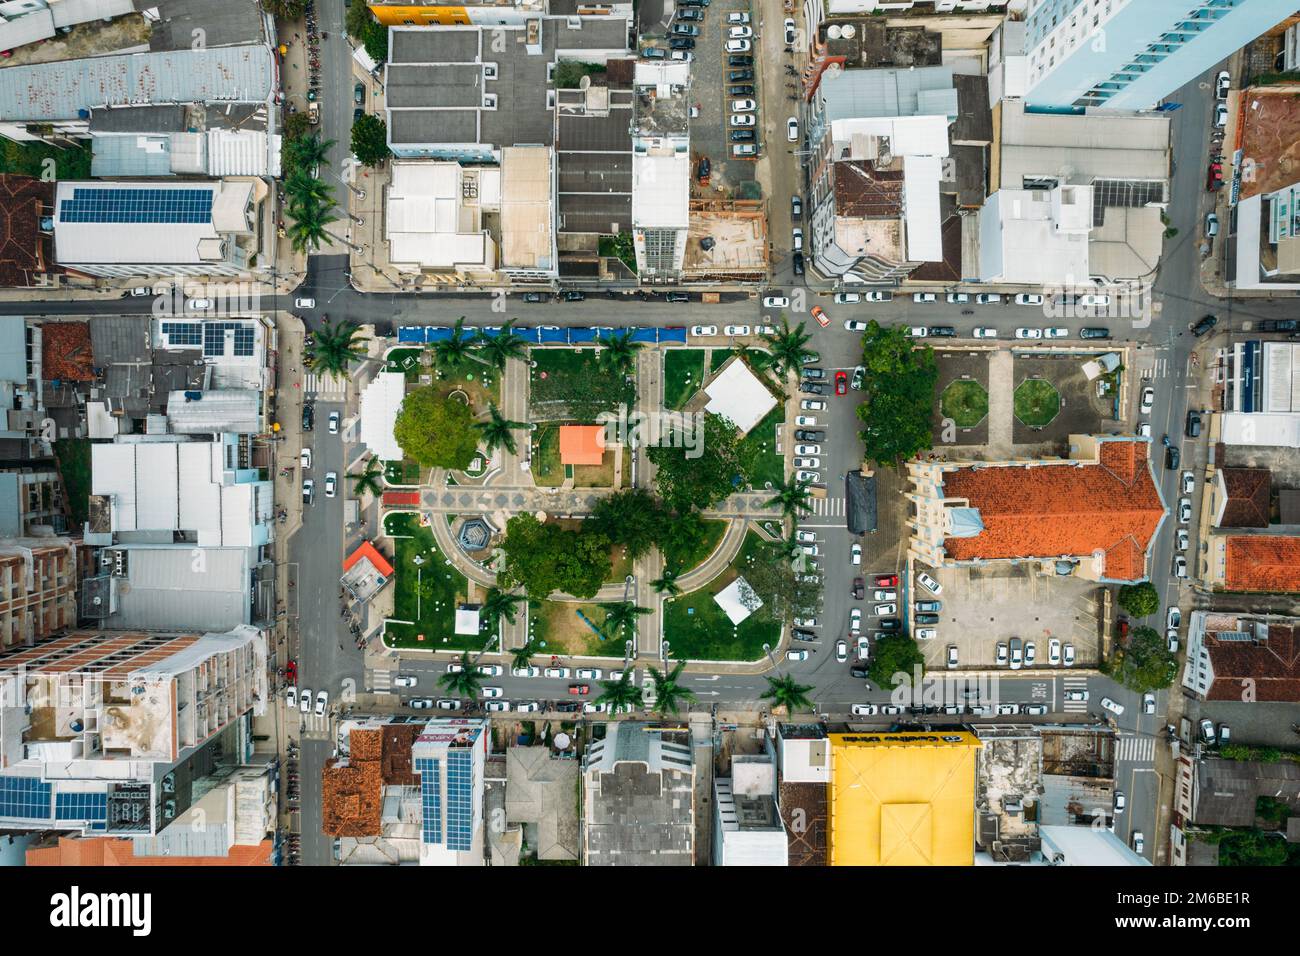 Top down view of main square with St. Lawrence Church in Manhuacu, Minas Gerais, Brazil Stock Photo